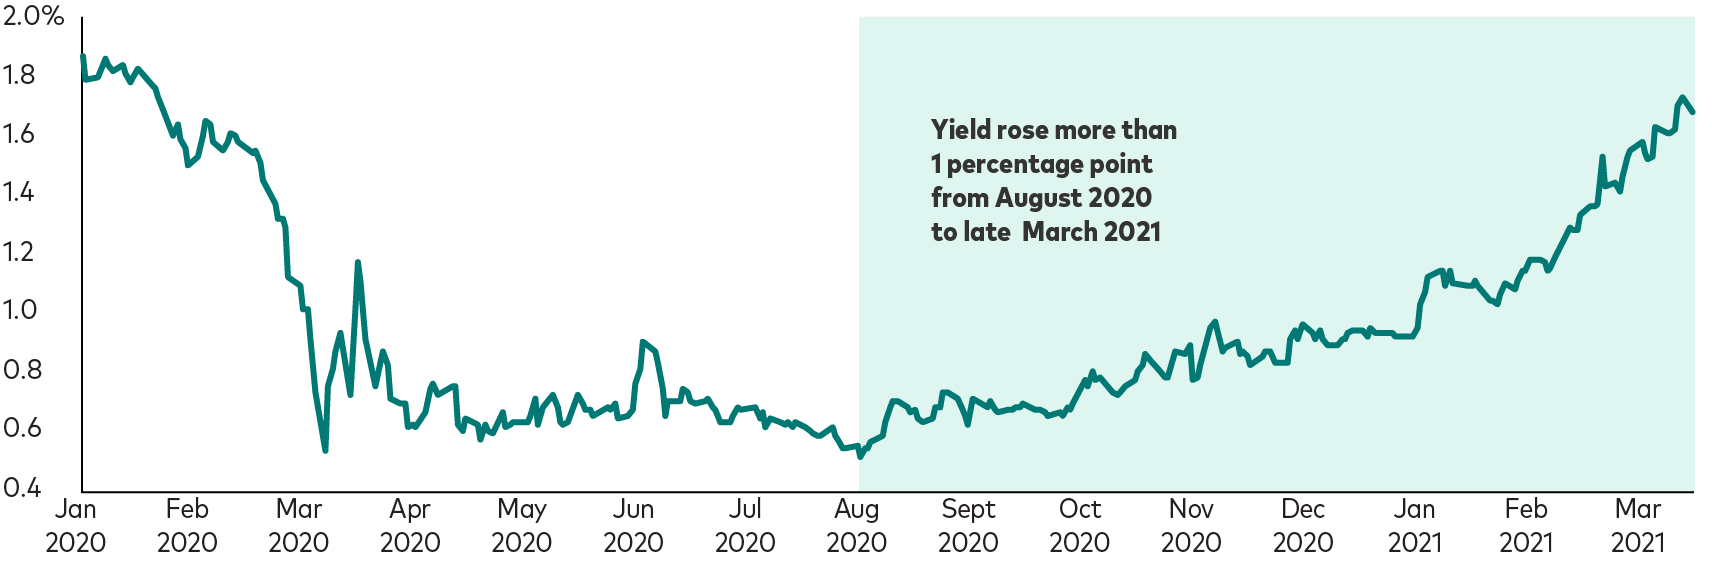 Figure shows the yield of the 10-year U.S. Treasury bill from January 2, 2020, through March 22, 2021, including a rise of more than 100 basis points since August 2020, according to Treasury Department data. Rising bond yields mean lower bond prices.